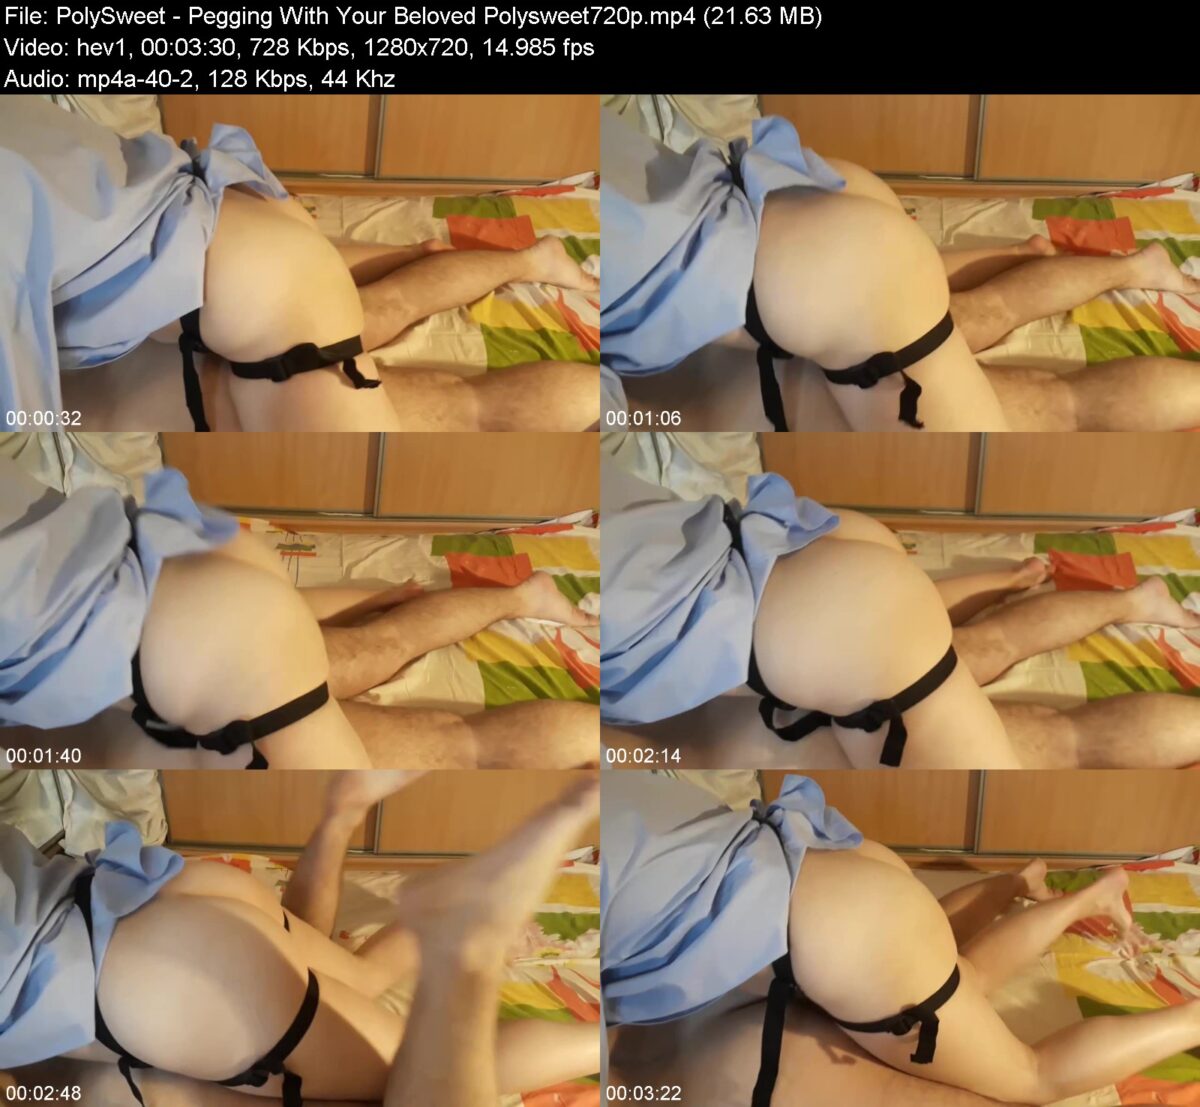 Actress: PolySweet. Title and Studio: Pegging With Your Beloved Polysweet720p